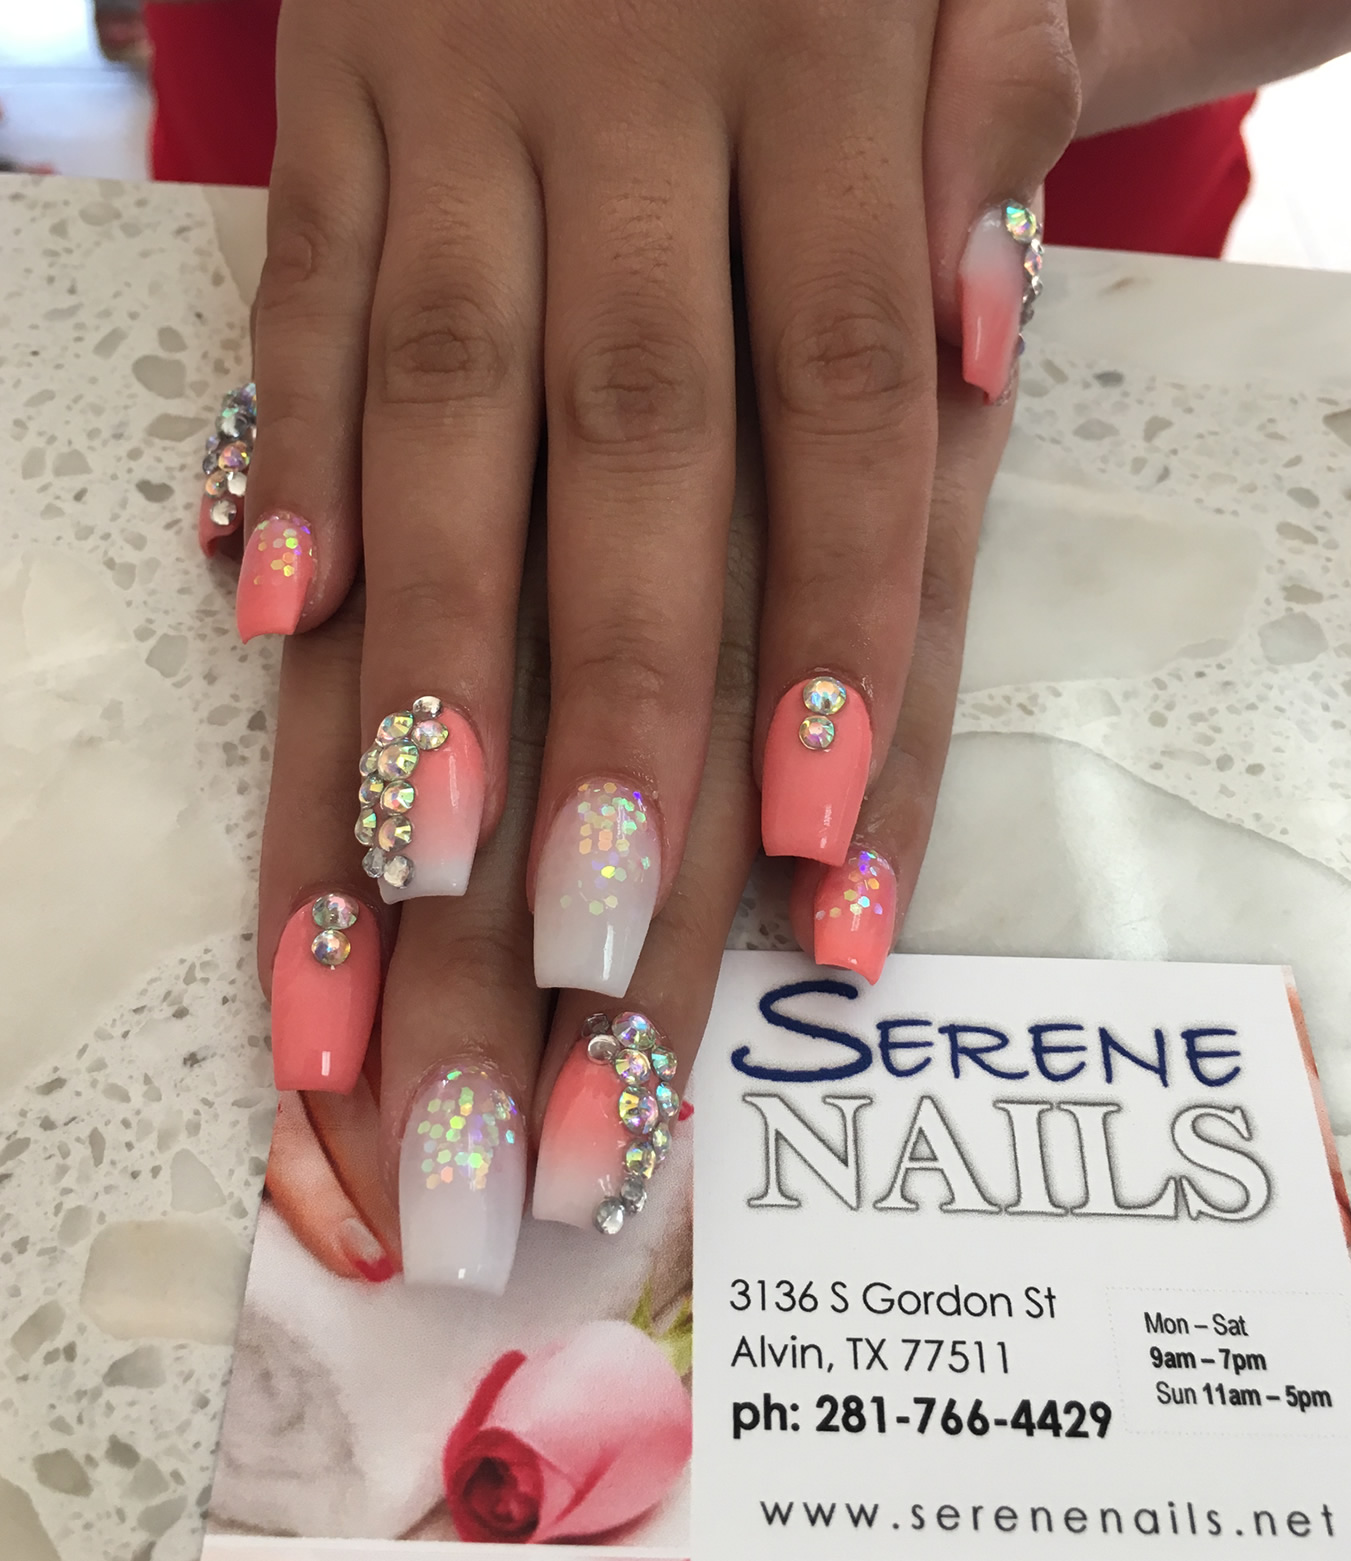 Serene Nails Coupons near me in Alvin | 8coupons